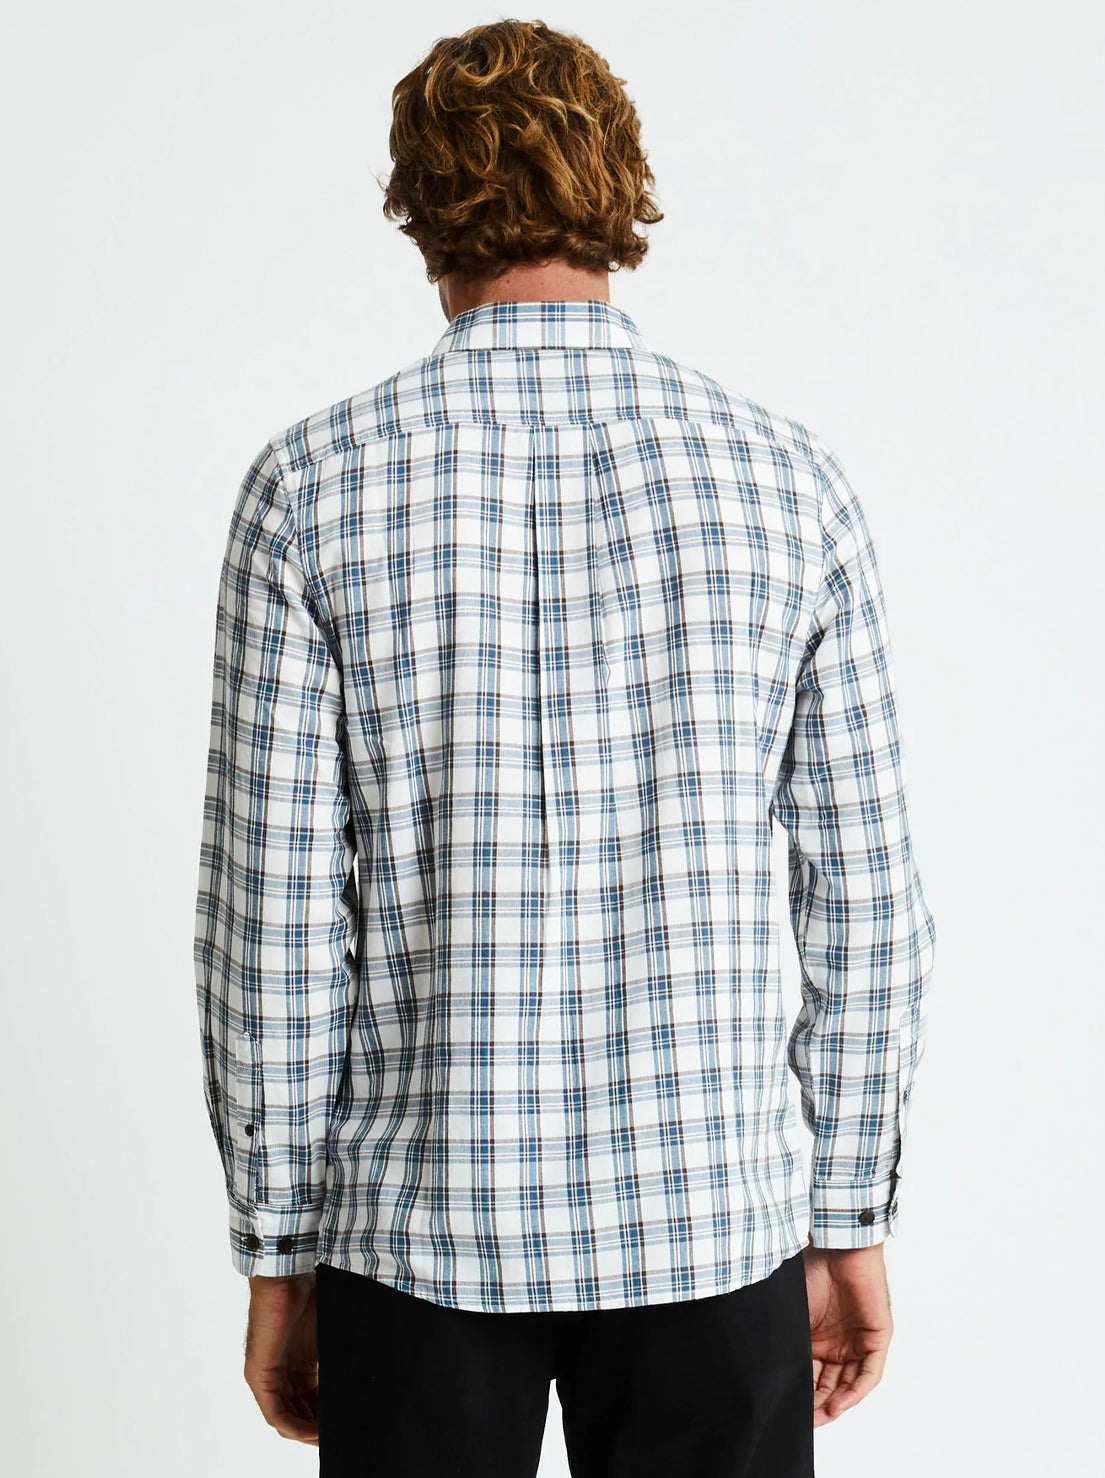 Mr Simple - Oxford LS Plaid Flannel - New Check